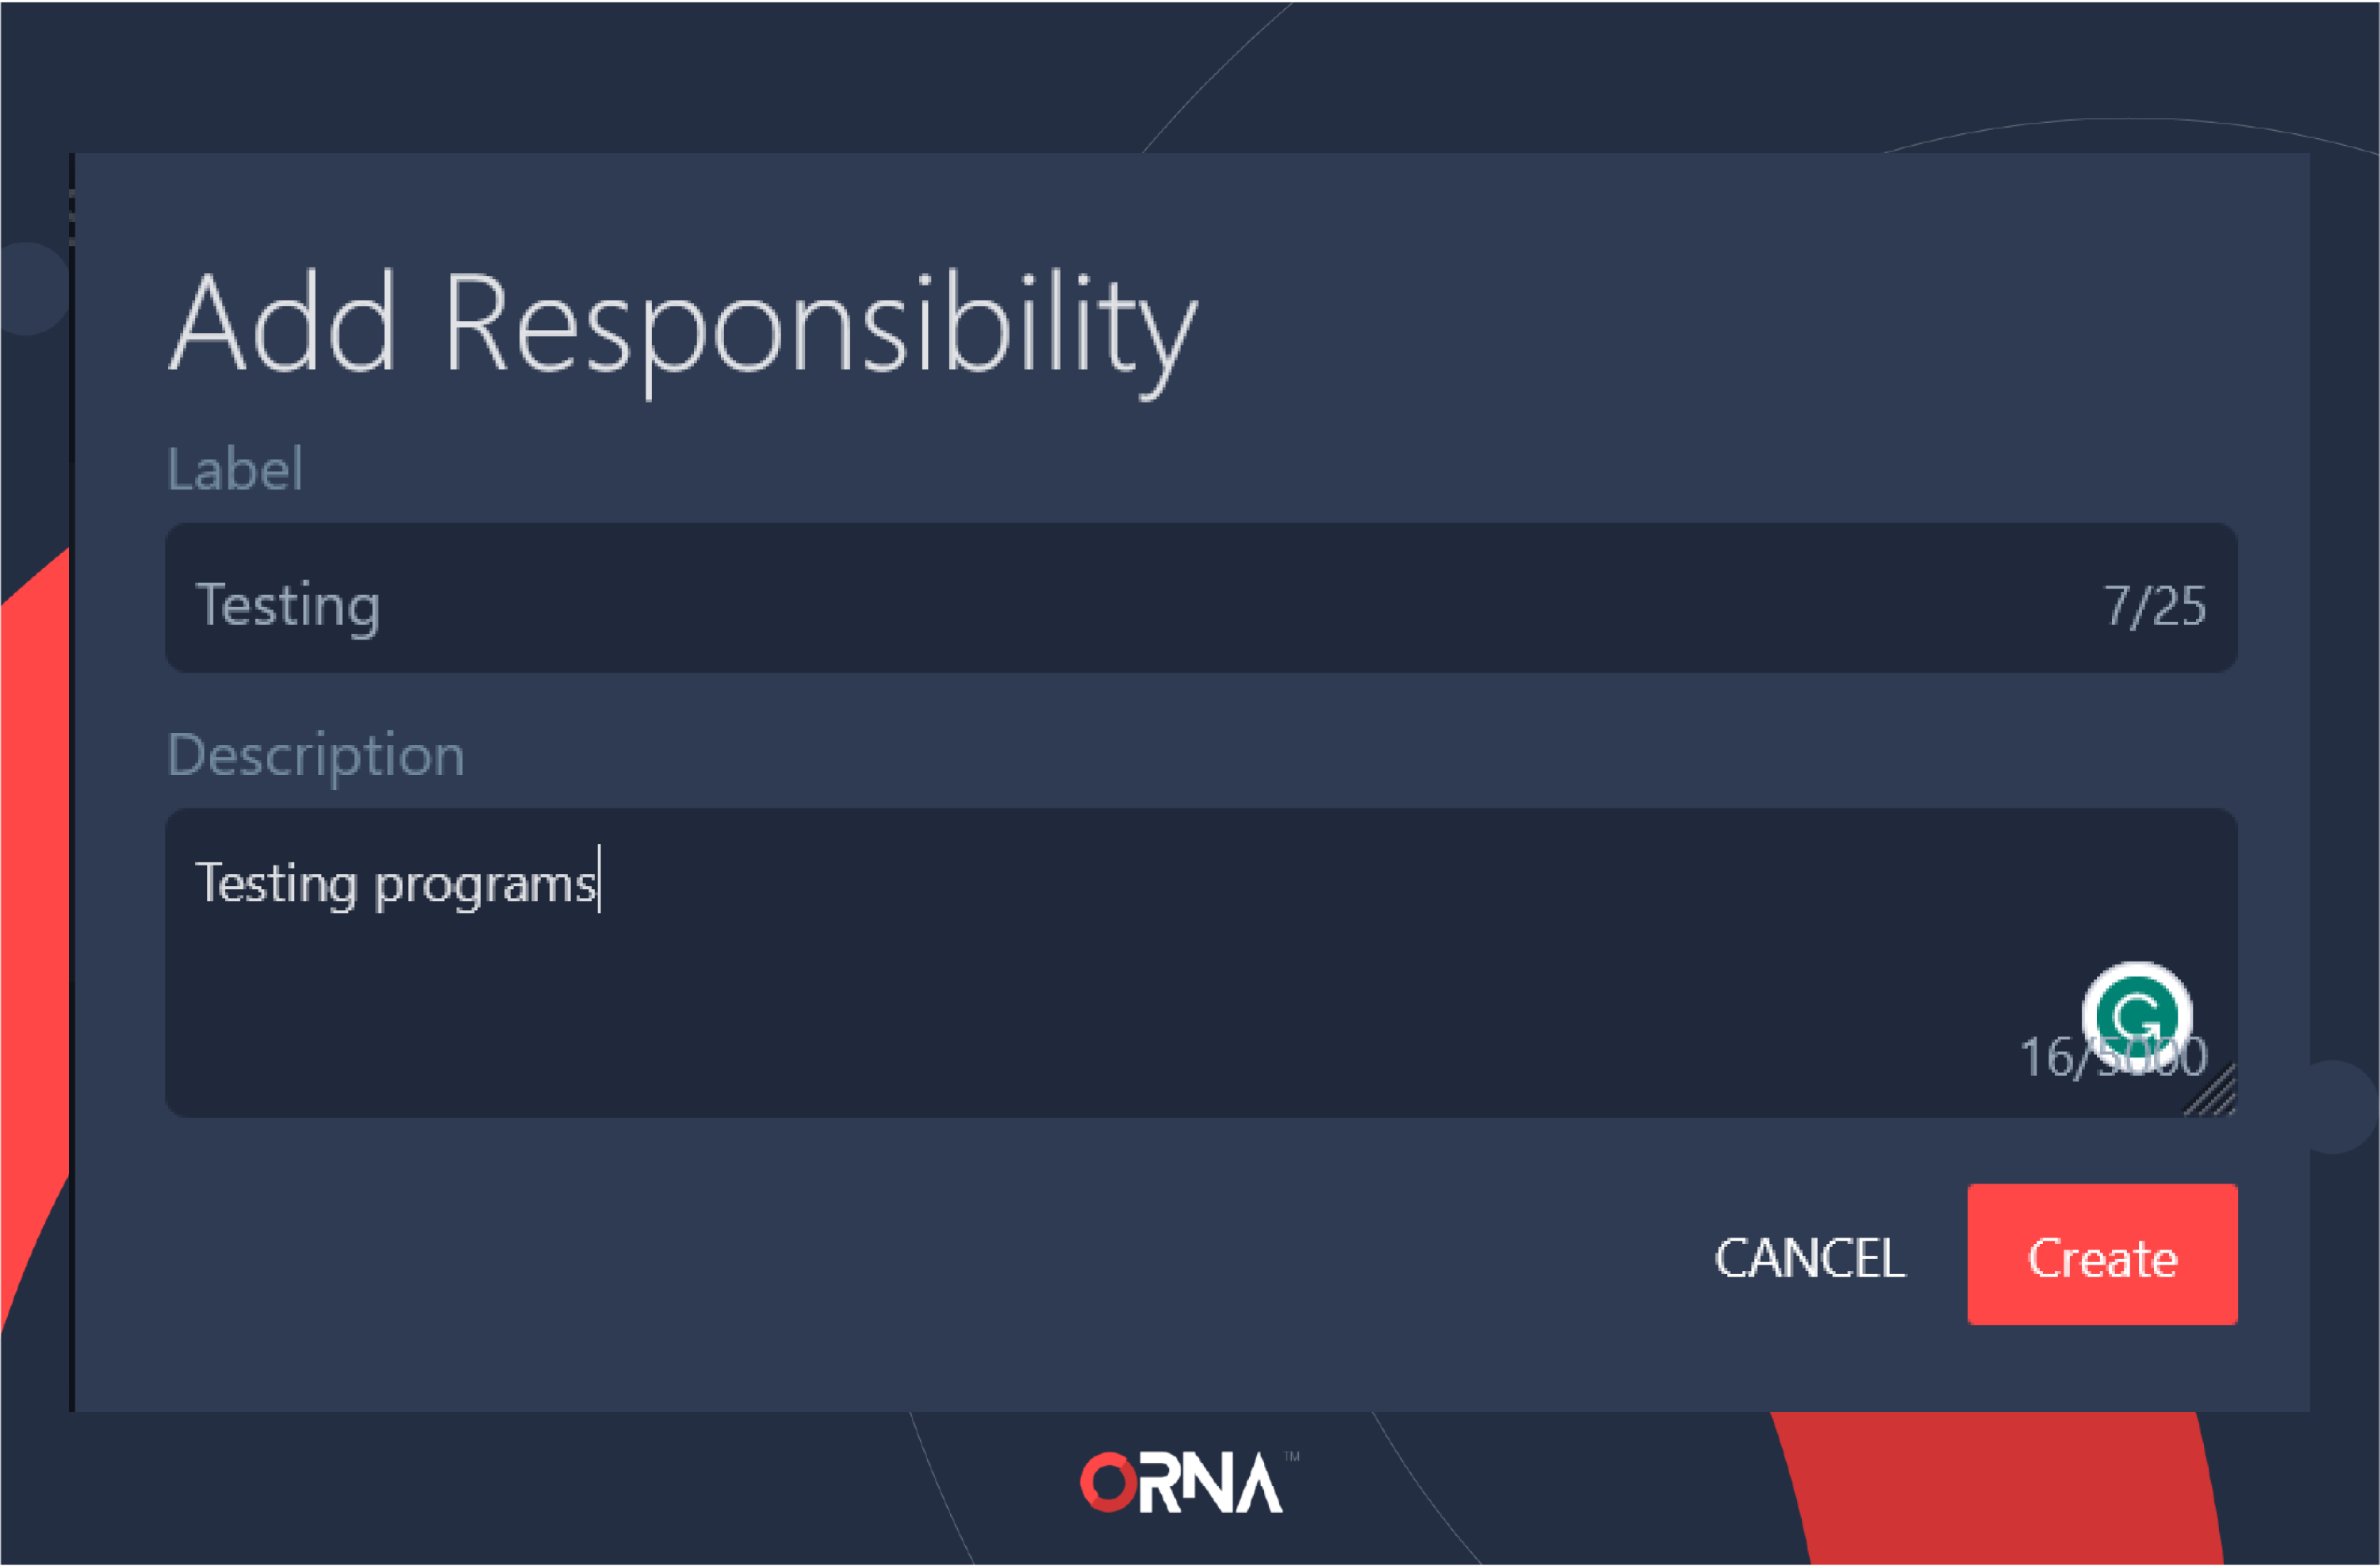 Creating a new Responsibility